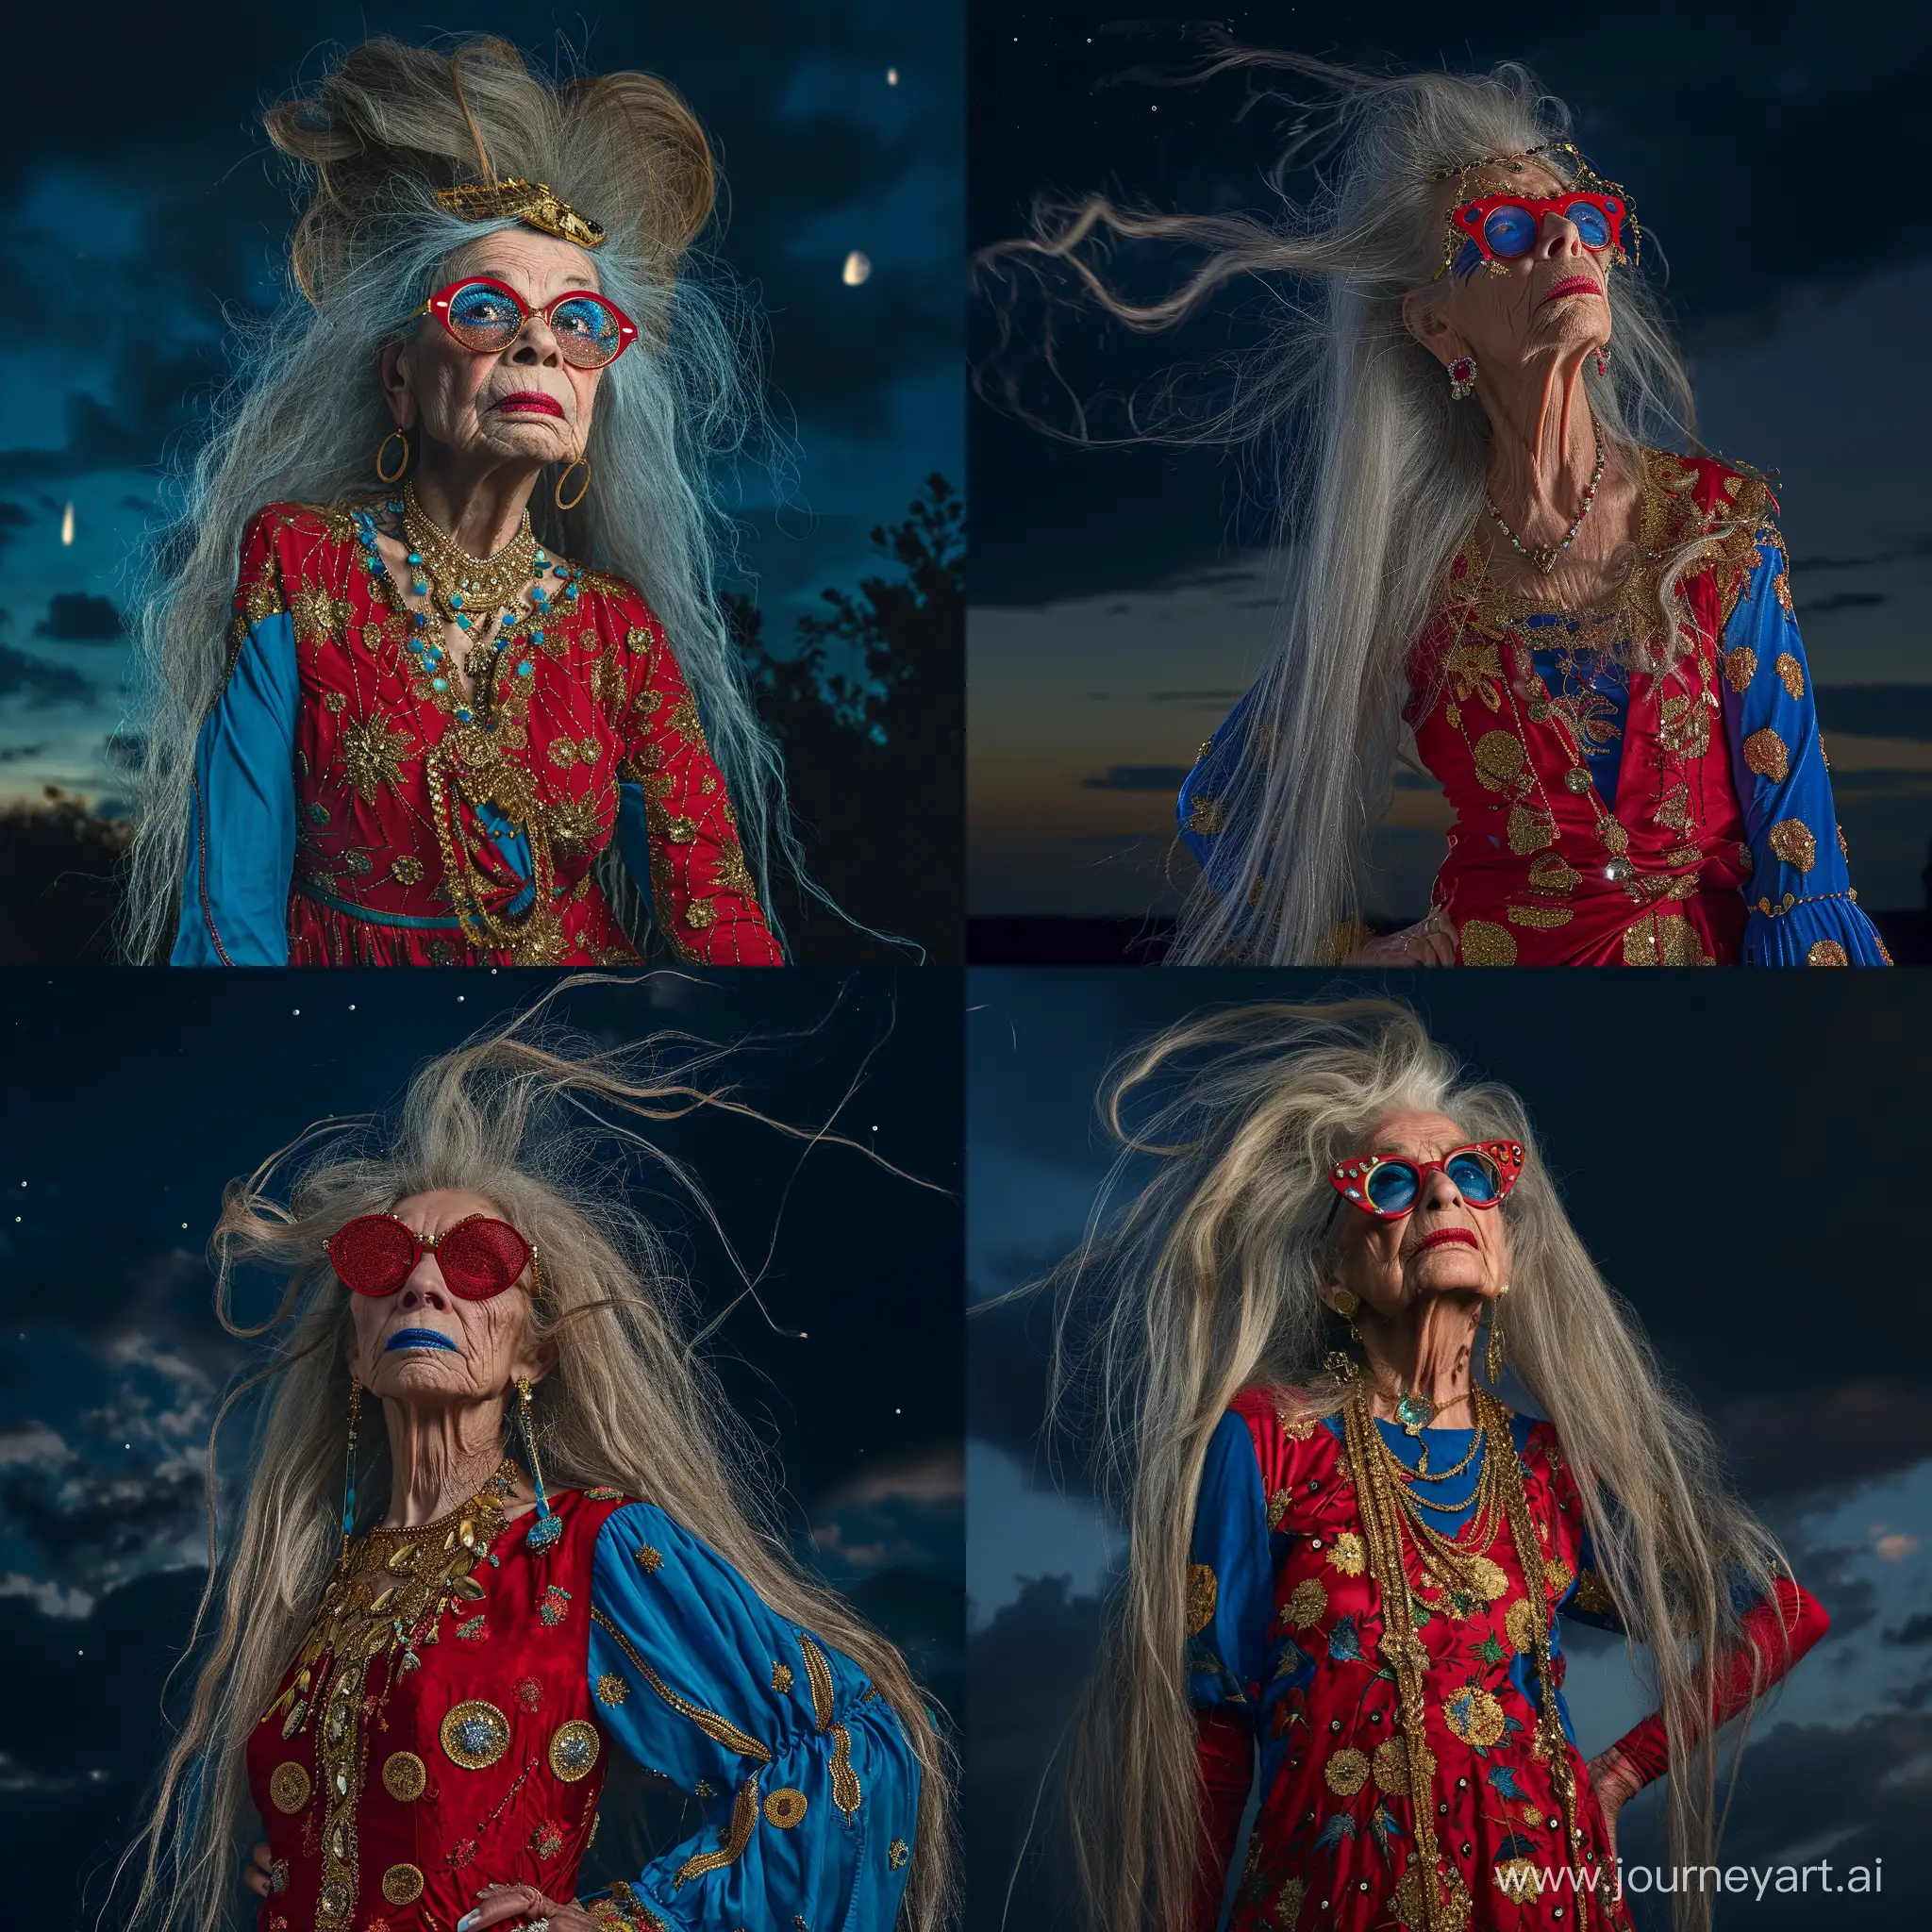    very old skiny hippie women whit wild long hair wearing  red     bleu dress with gold  and a red old fashion sunglass with some diamonds on and red lips and bleu mascara standing at adark sky  fotorealistisch 50mm fuji xt2 